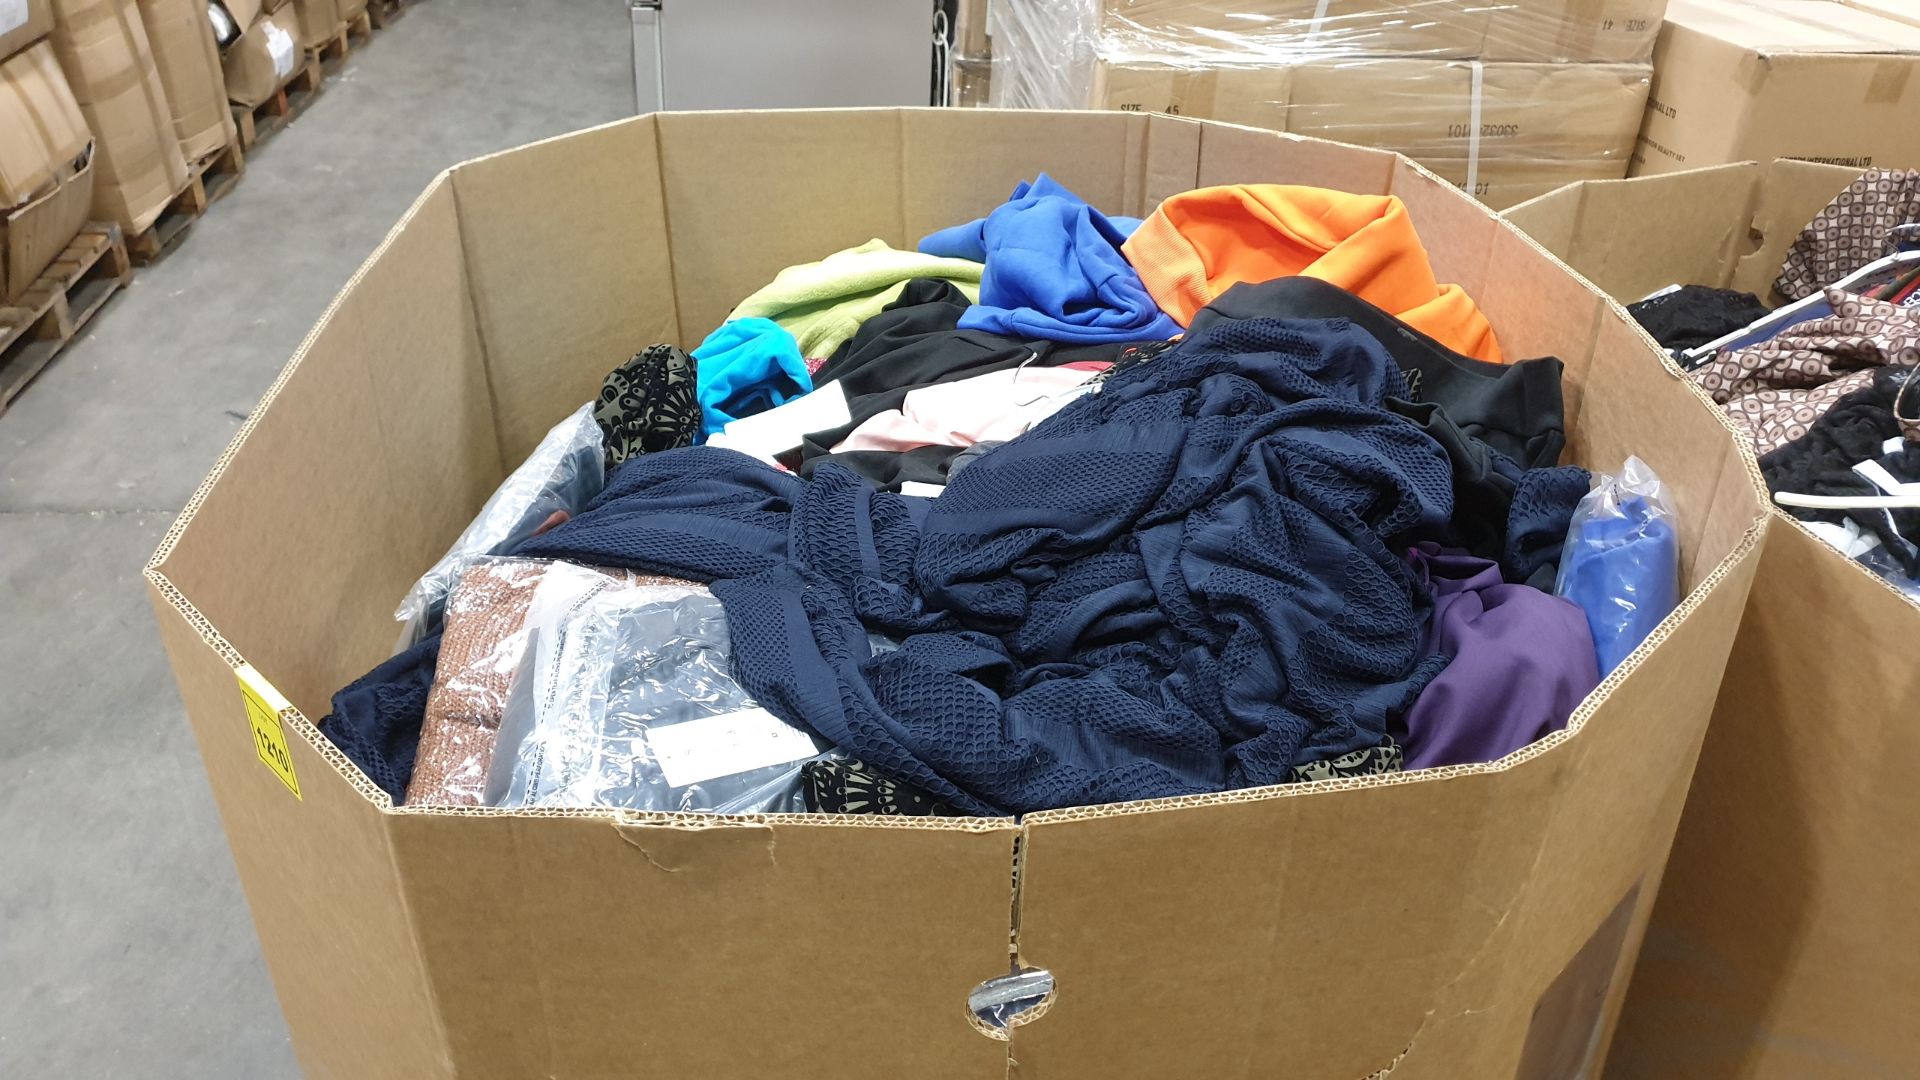 FULL PALLET OF CLOTHING IE DORT AS CLASSIC JUMPERS, ELITE SKIRTS, LOST CITY VIEWS TOPS, GDG ACTUEL